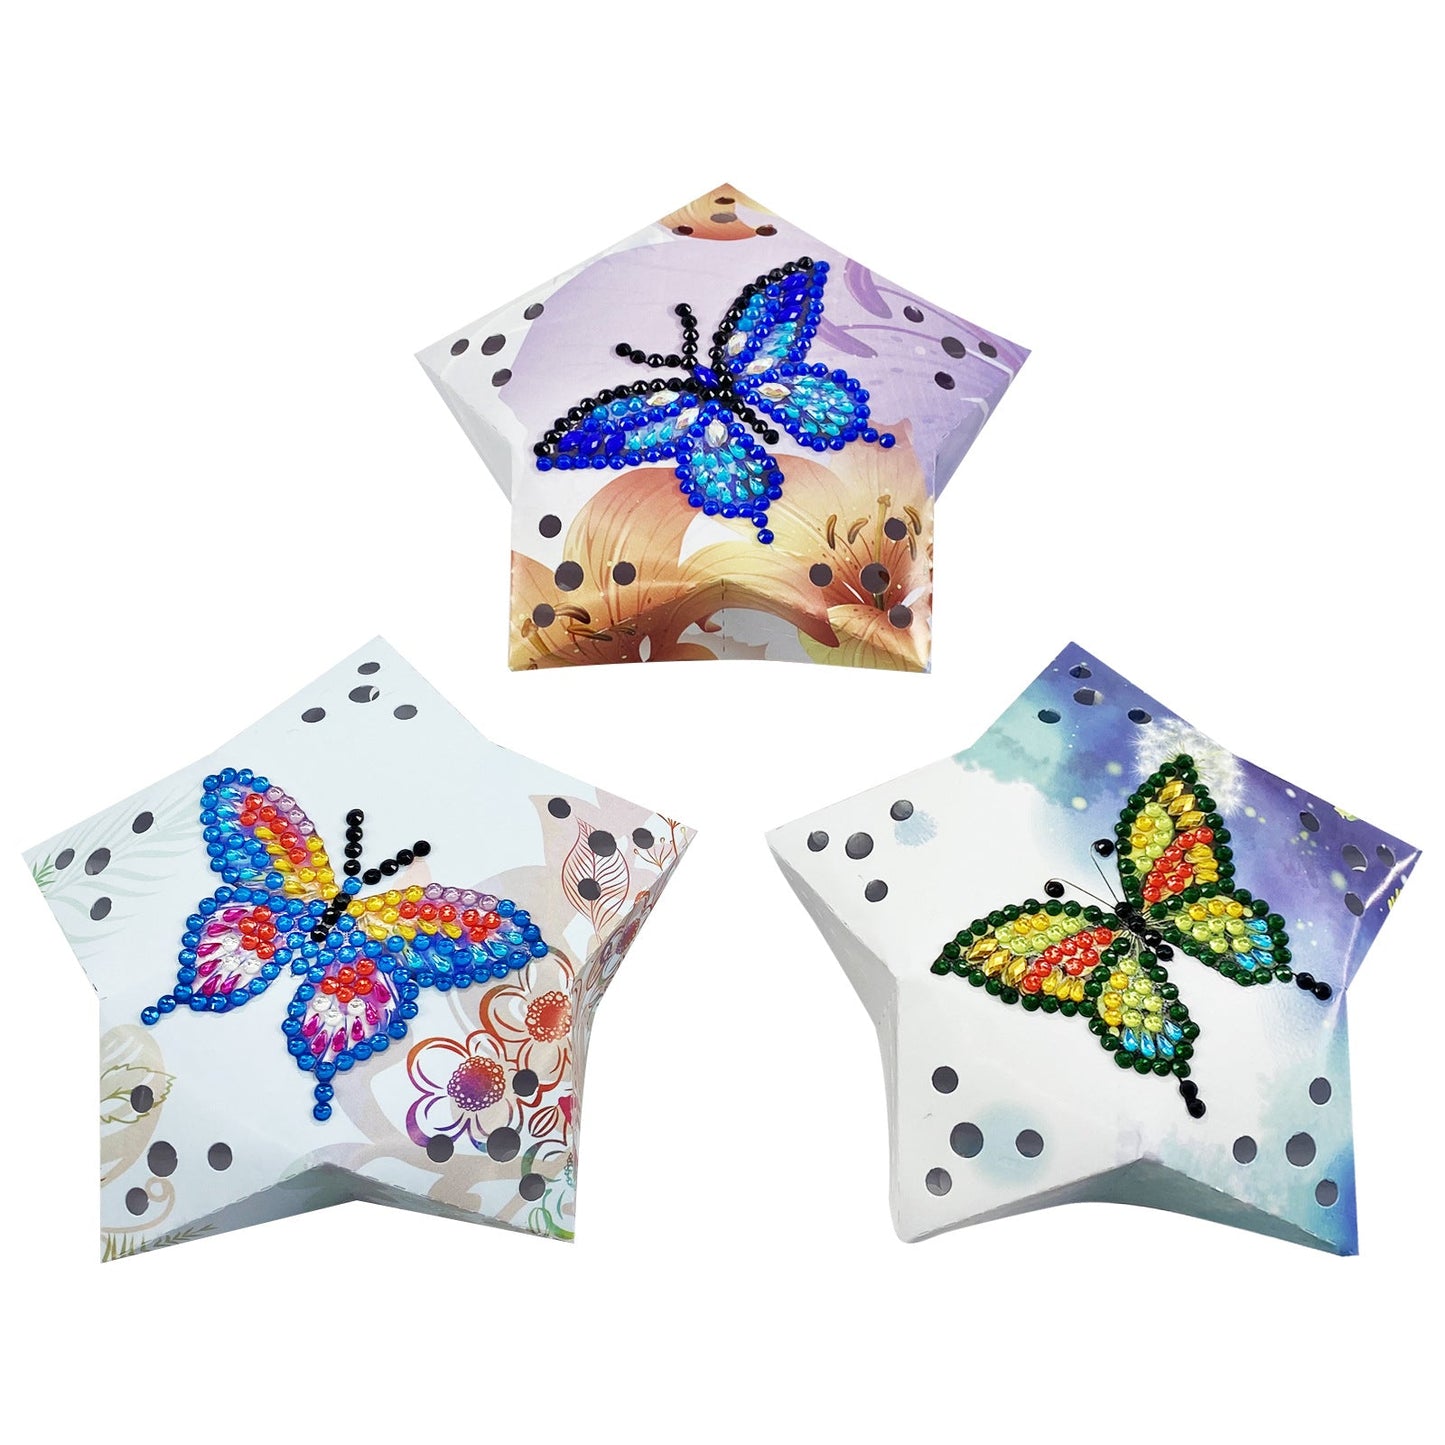 Butterfly Christmas Ornaments with LED String